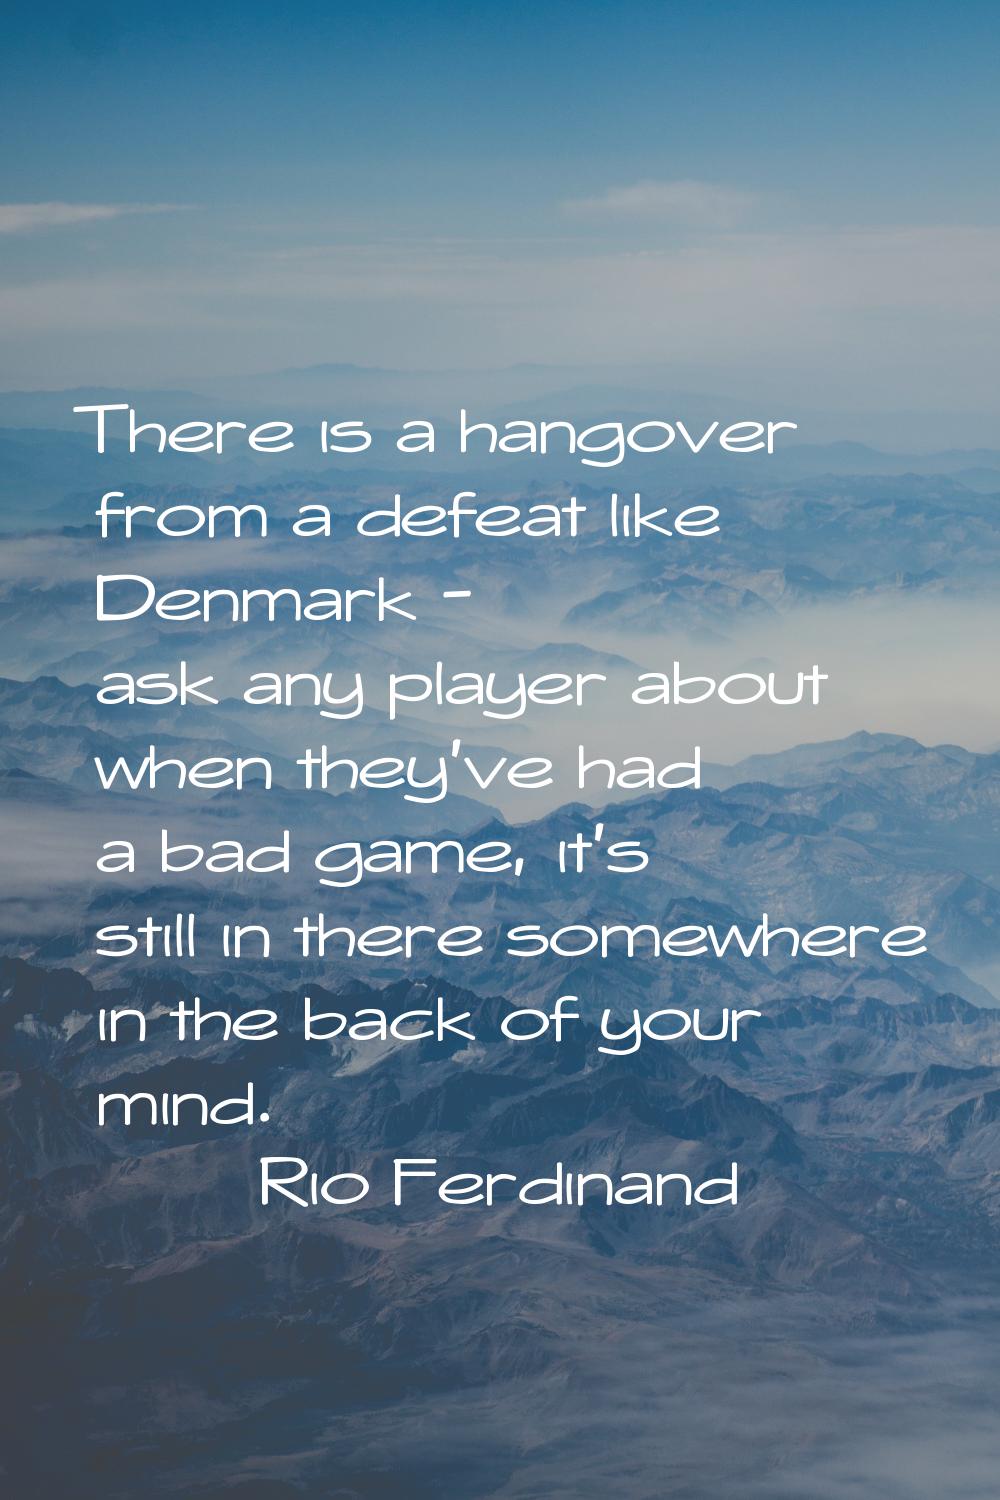 There is a hangover from a defeat like Denmark - ask any player about when they've had a bad game, 